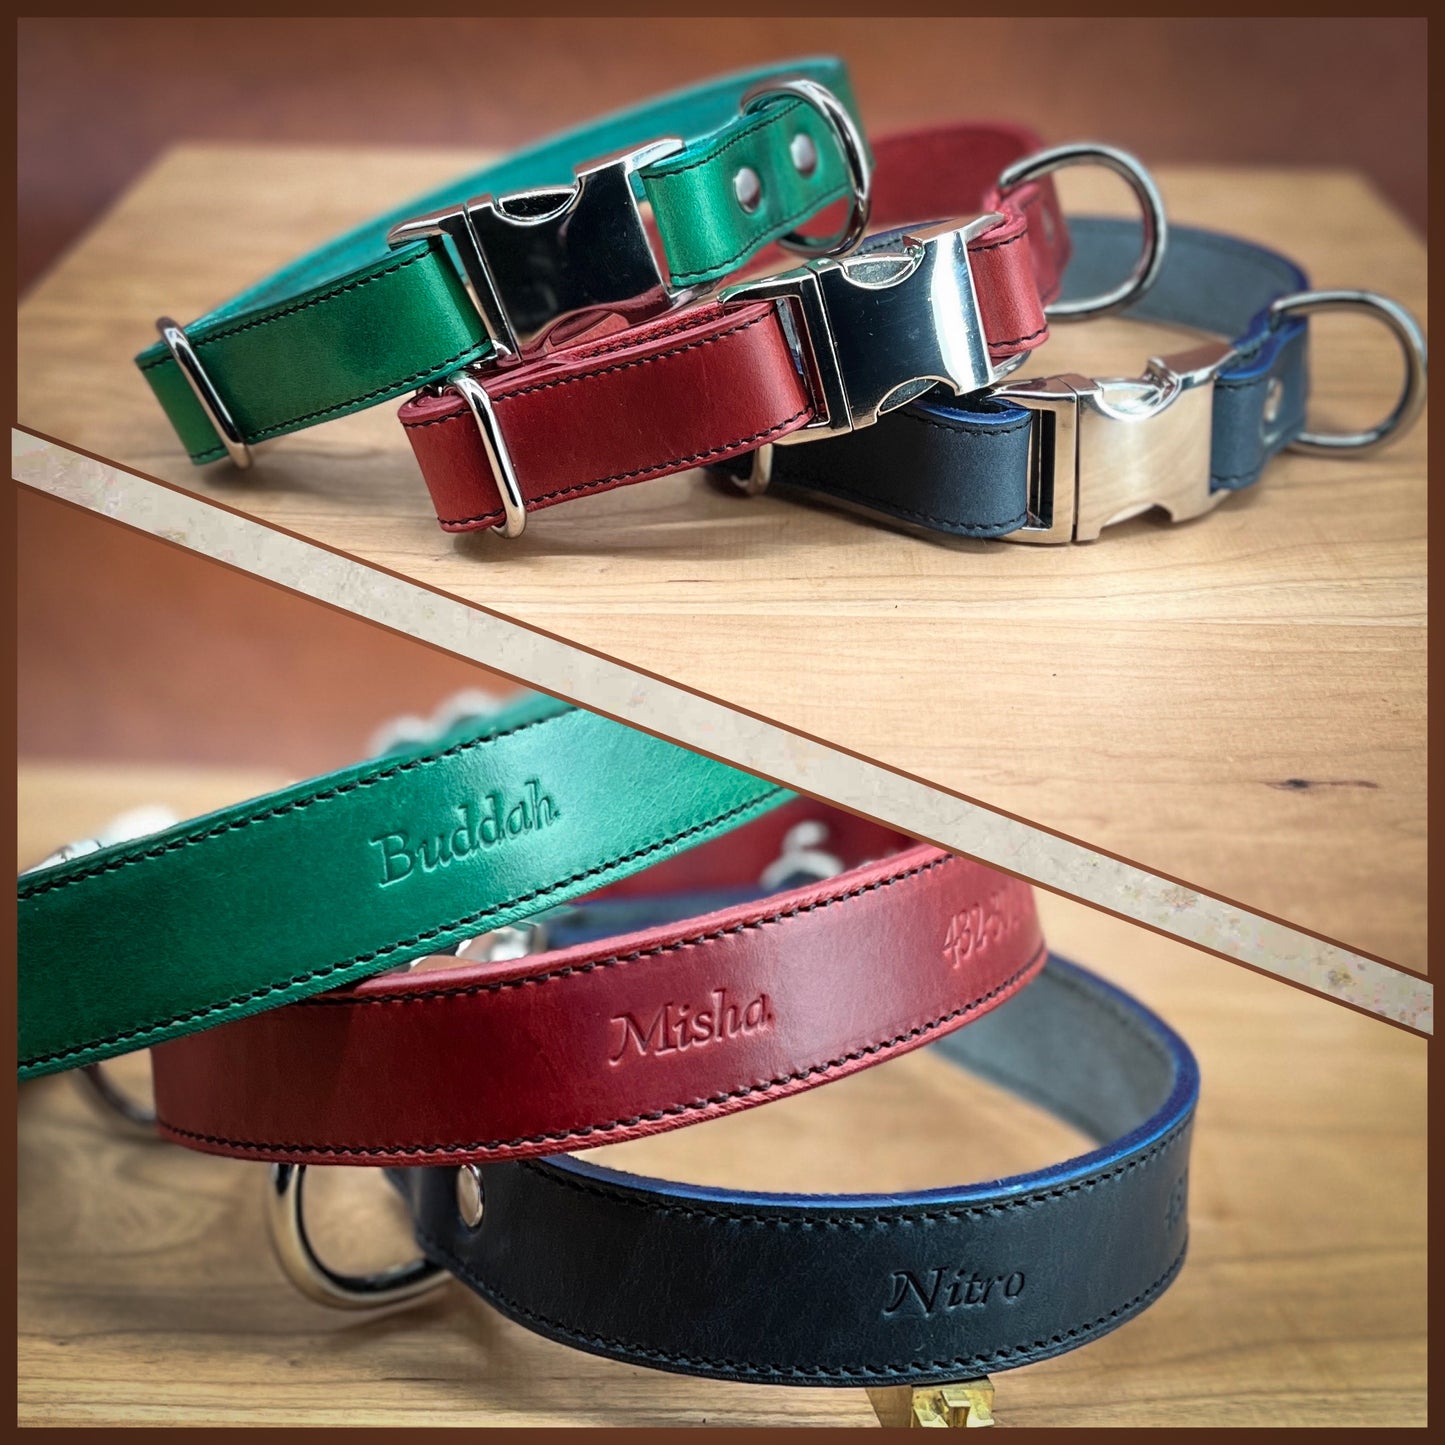 Quick Release Dog Collars in Horween Leather, Made to order